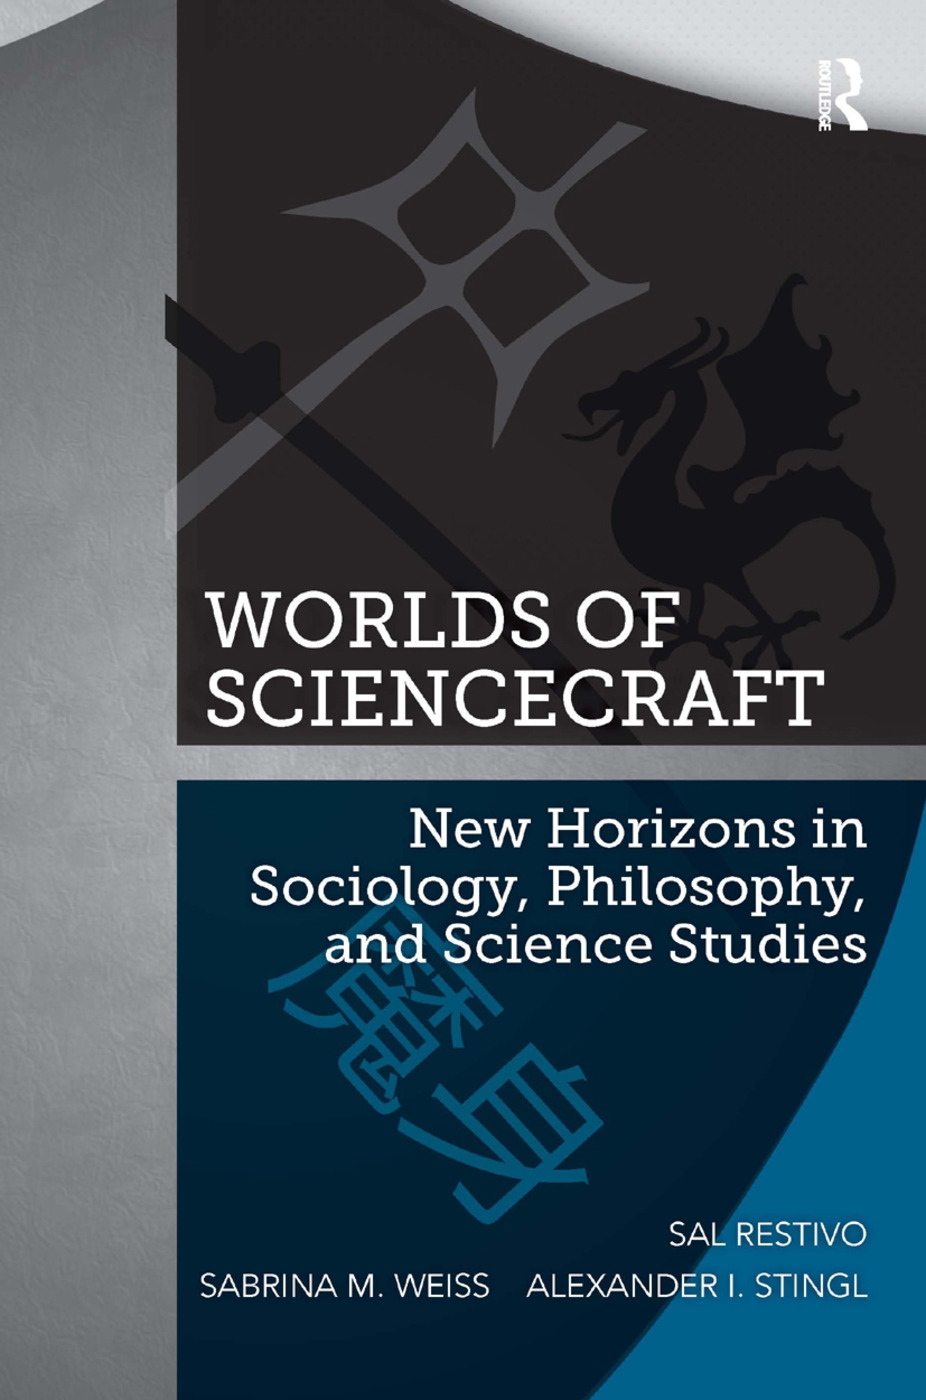 Worlds of Sciencecraft: New Horizons in Sociology, Philosophy, and Science Studies. Sal Restivo, Sabrina M. Weiss, Alexander I. Stingl